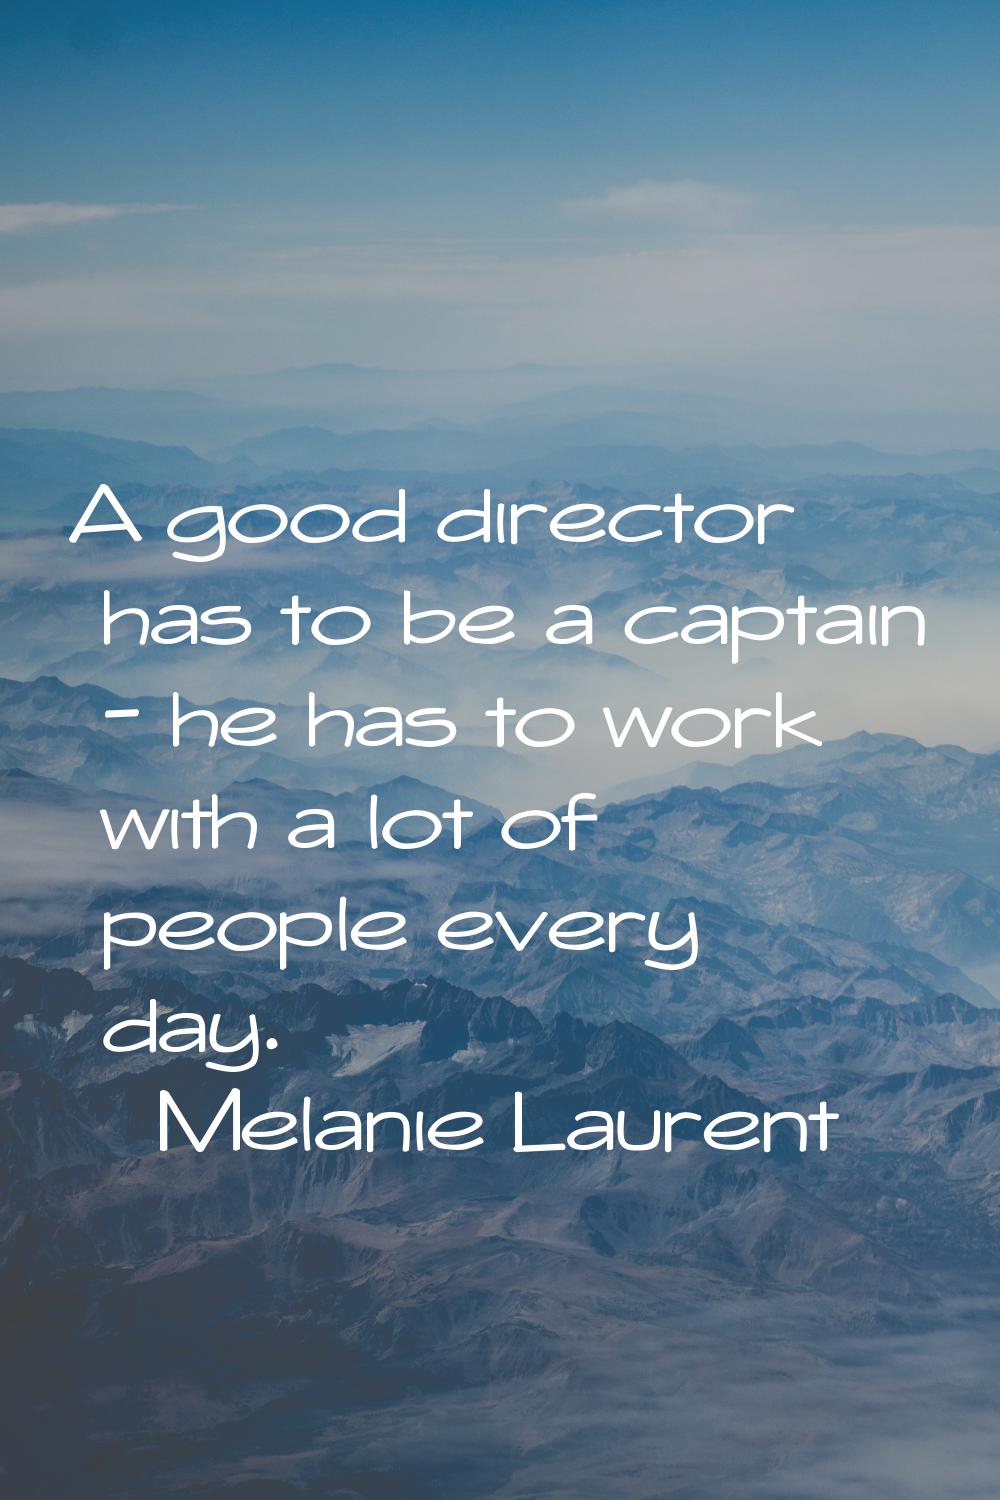 A good director has to be a captain - he has to work with a lot of people every day.